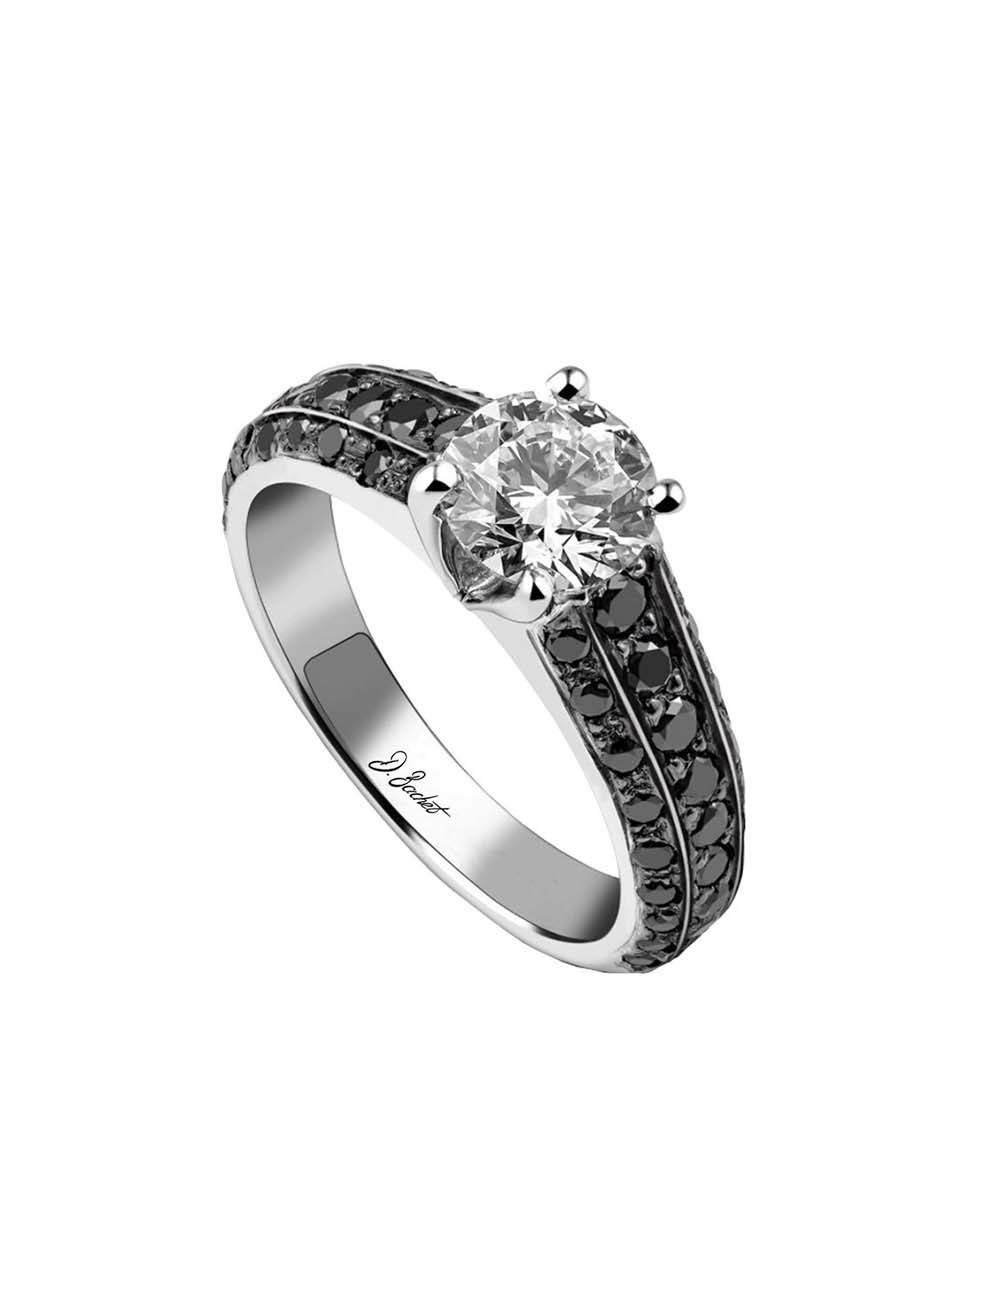 Unique engagement ring for women in platinum, a white diamond of 0.80 carat and black diamonds